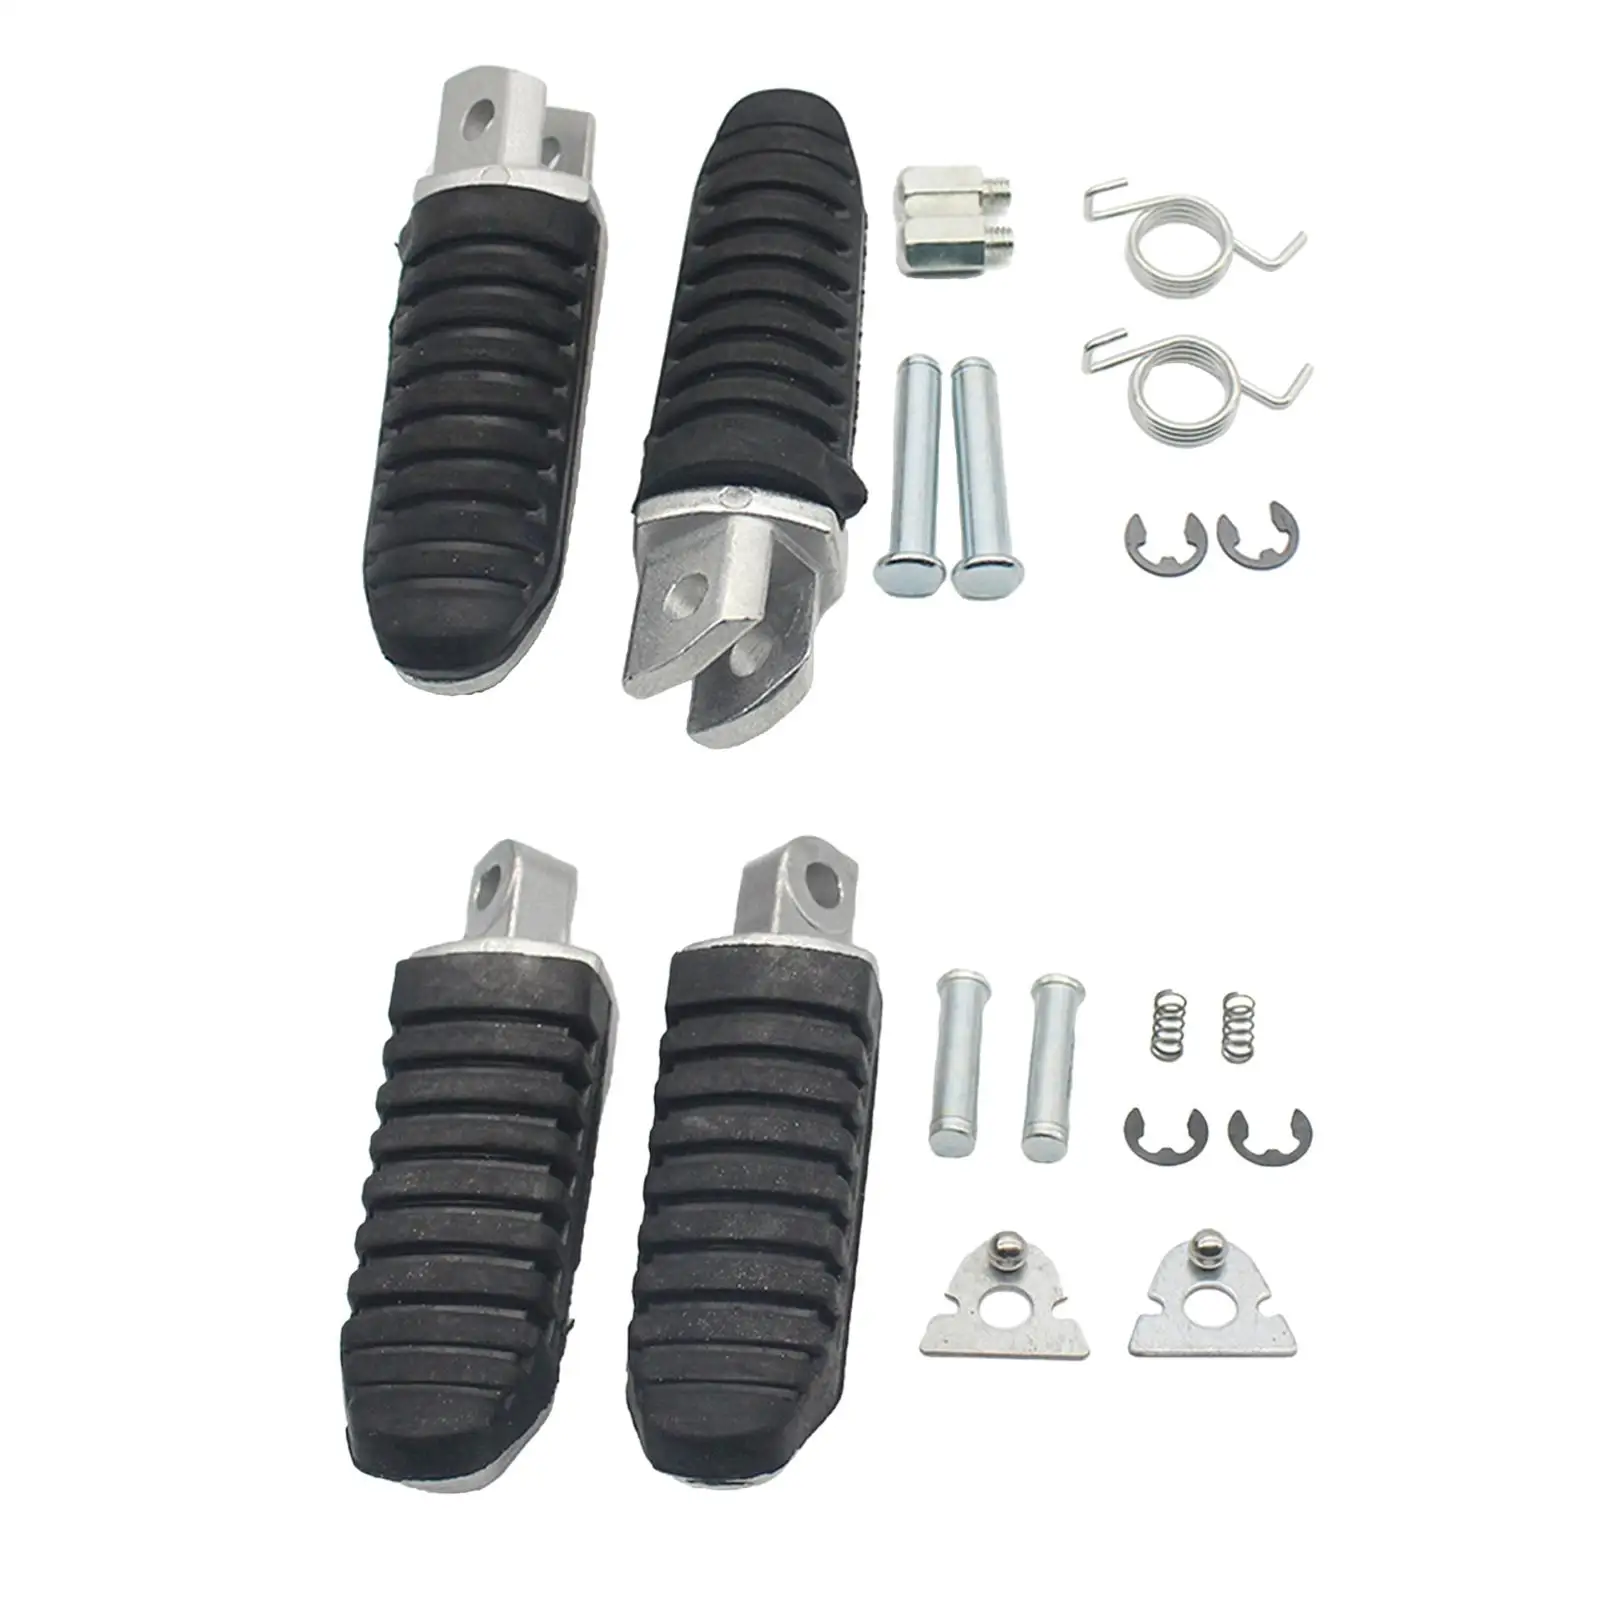 Motorcycle Foot Pegs Foot Rest Pedals Fit for Suzuki Parts High Performance